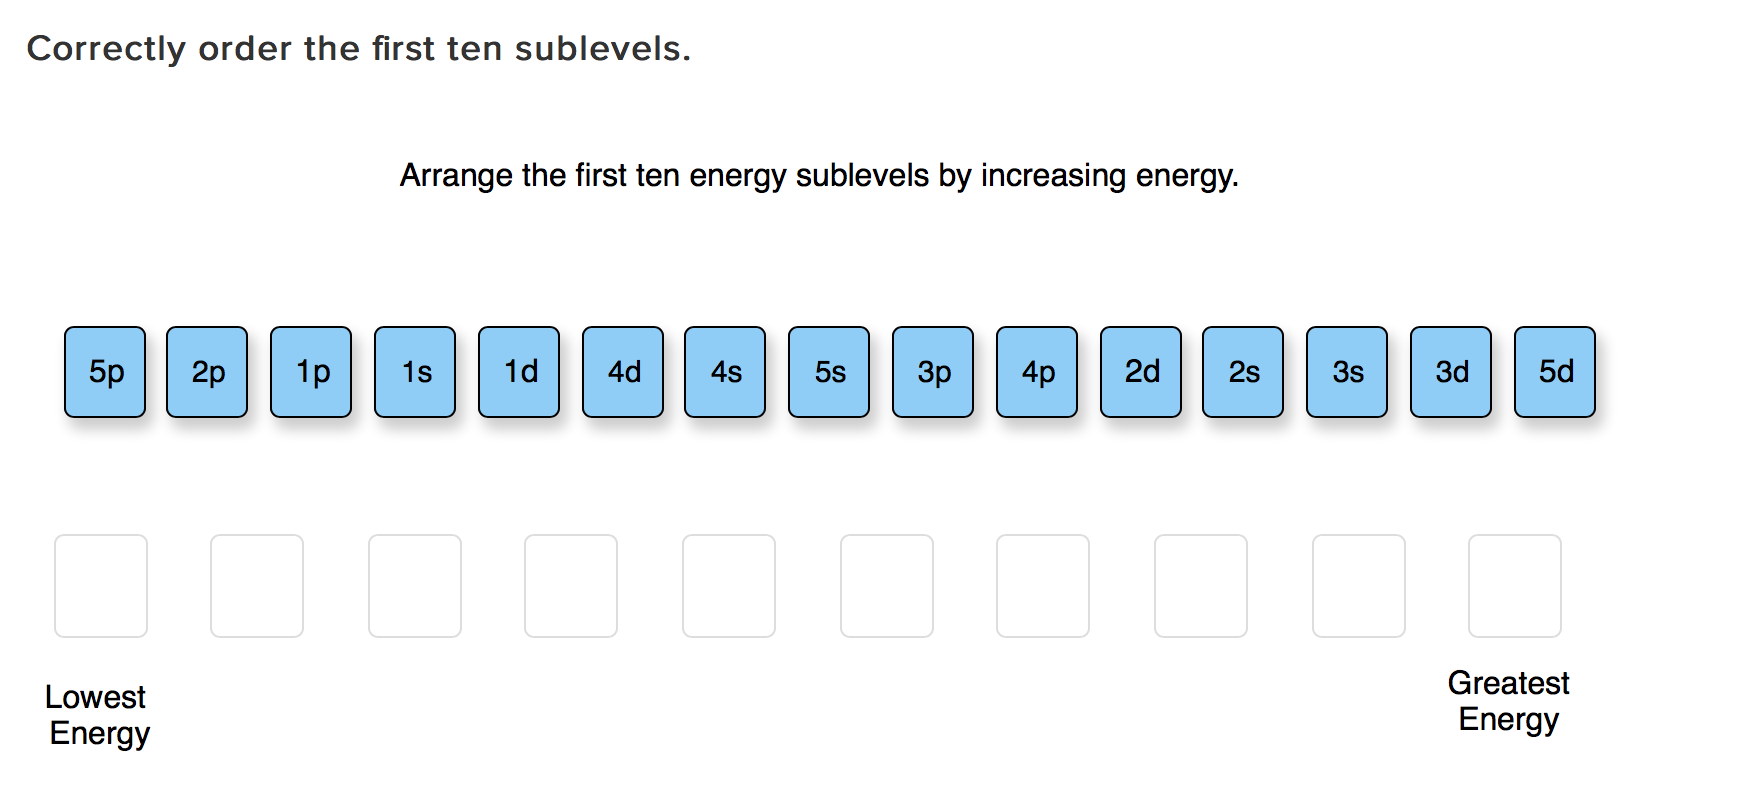 Arrange the first ten energy sublevels by increasing energy.